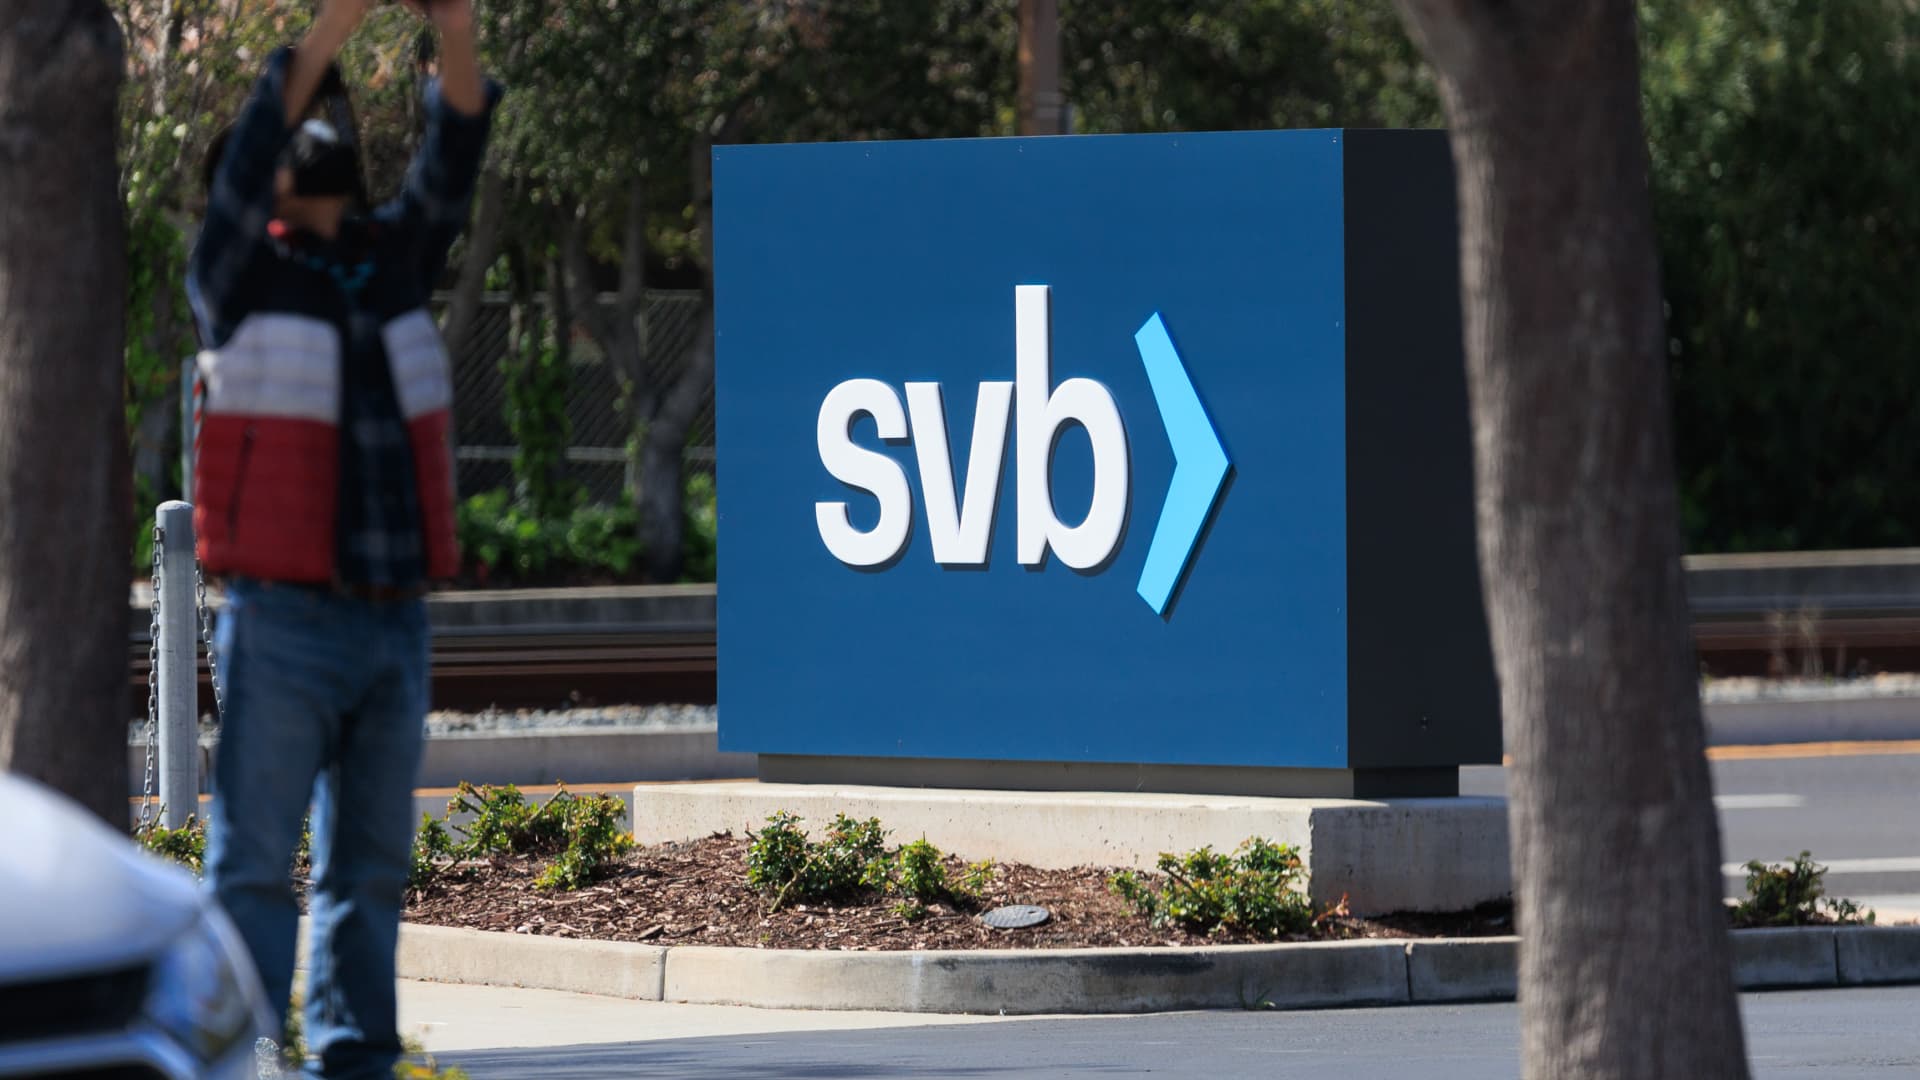 Southeast Asia VC firms could see a larger impact from SVB fallout than startups